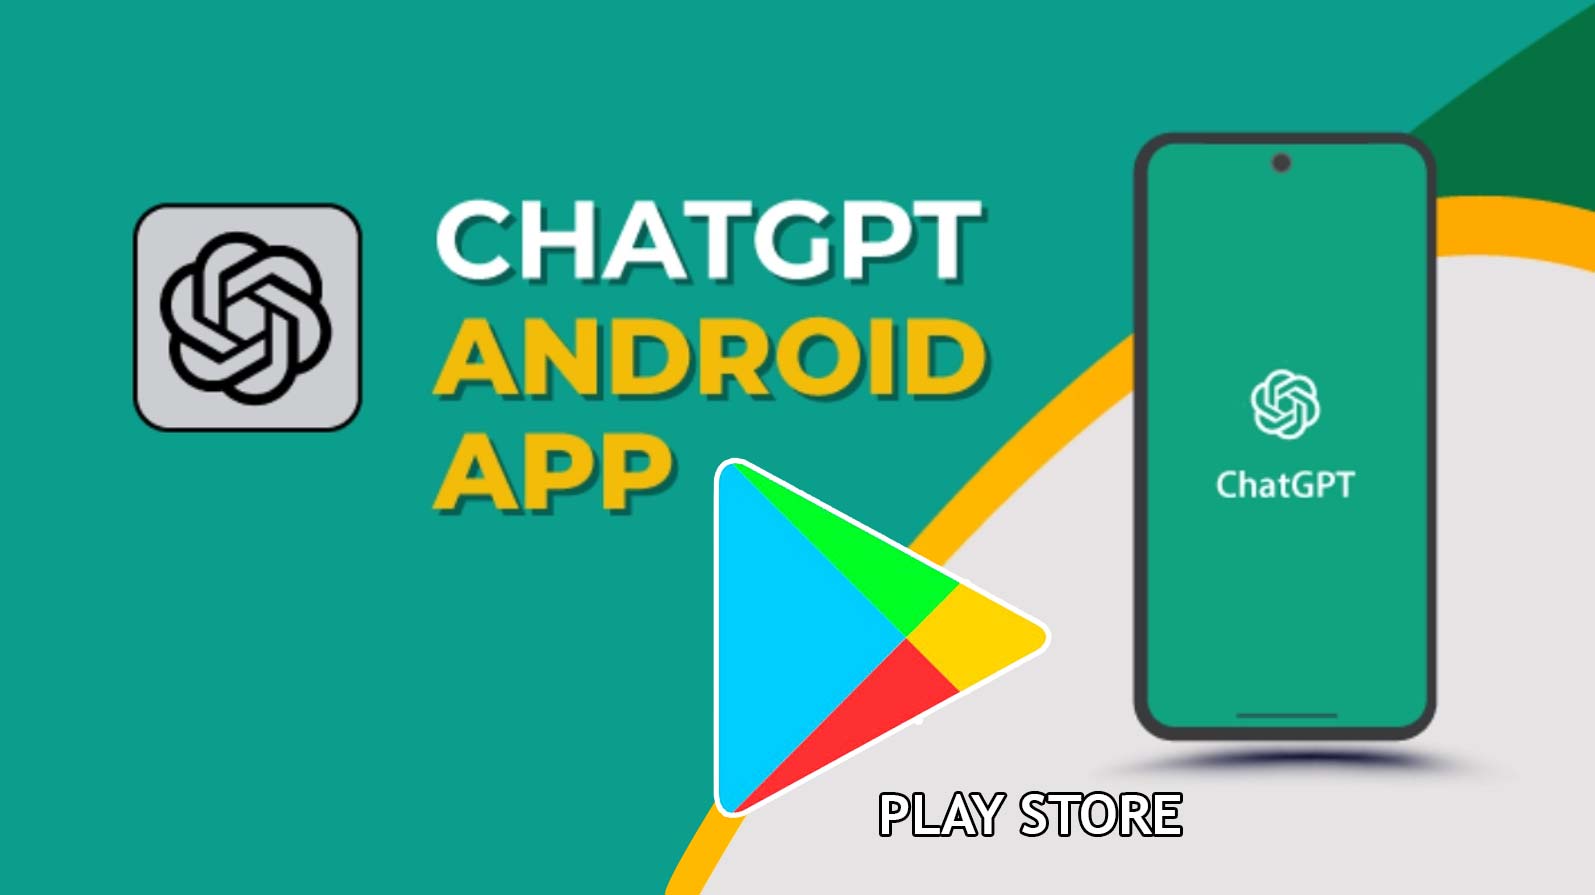 ChatGPT App Launches For Android Next Week, Should Google Bard Be Worried?